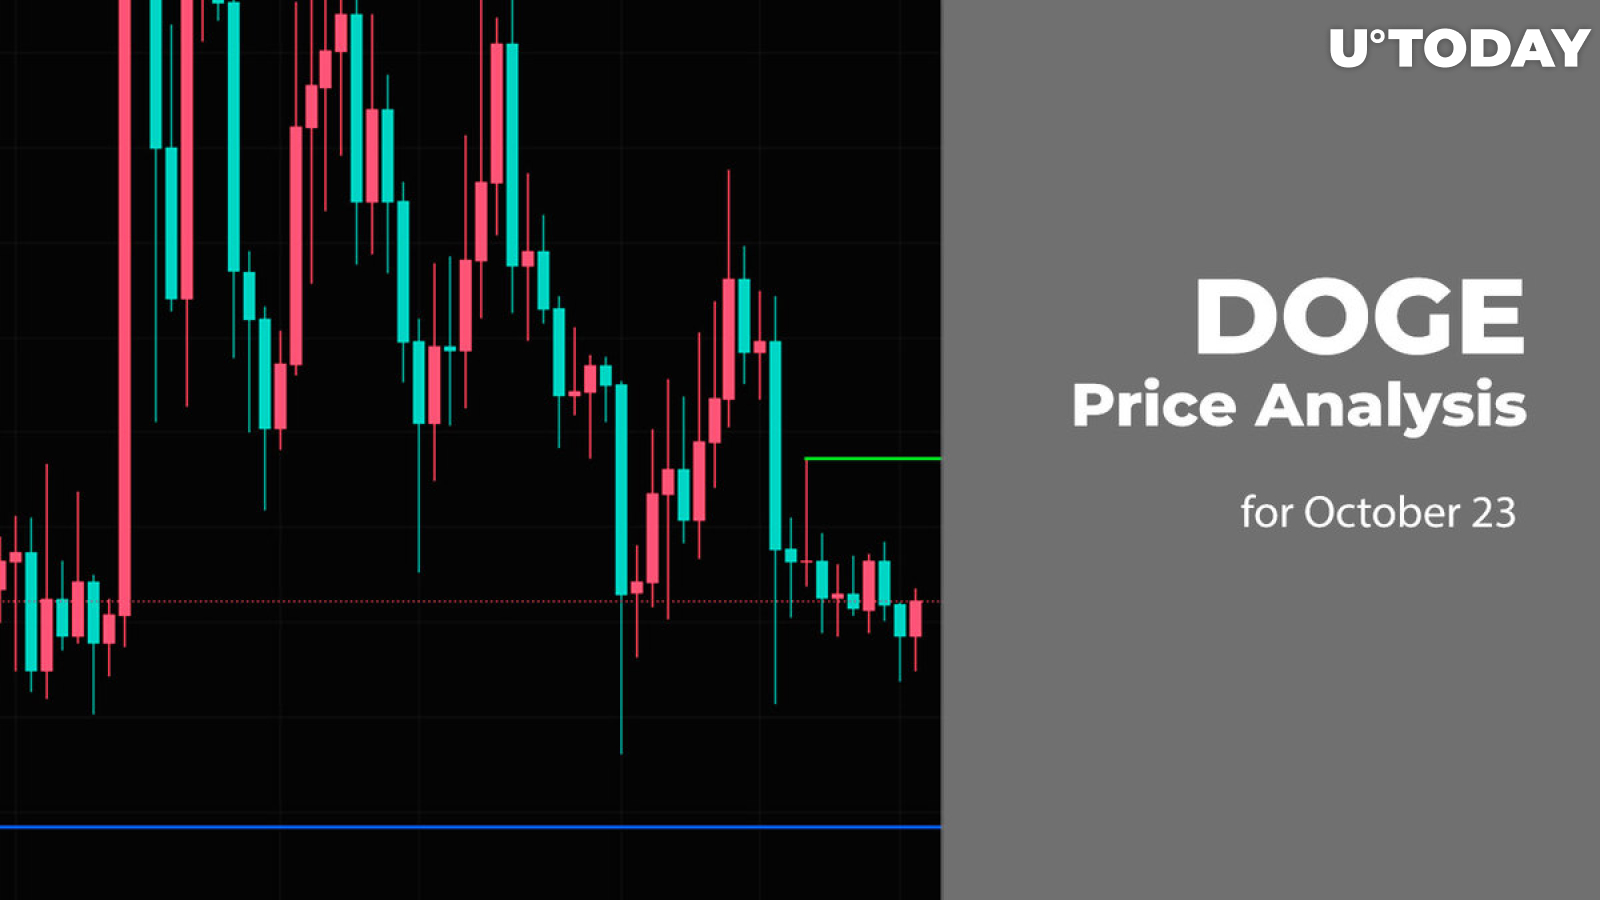 DOGE Price Analysis for October 23